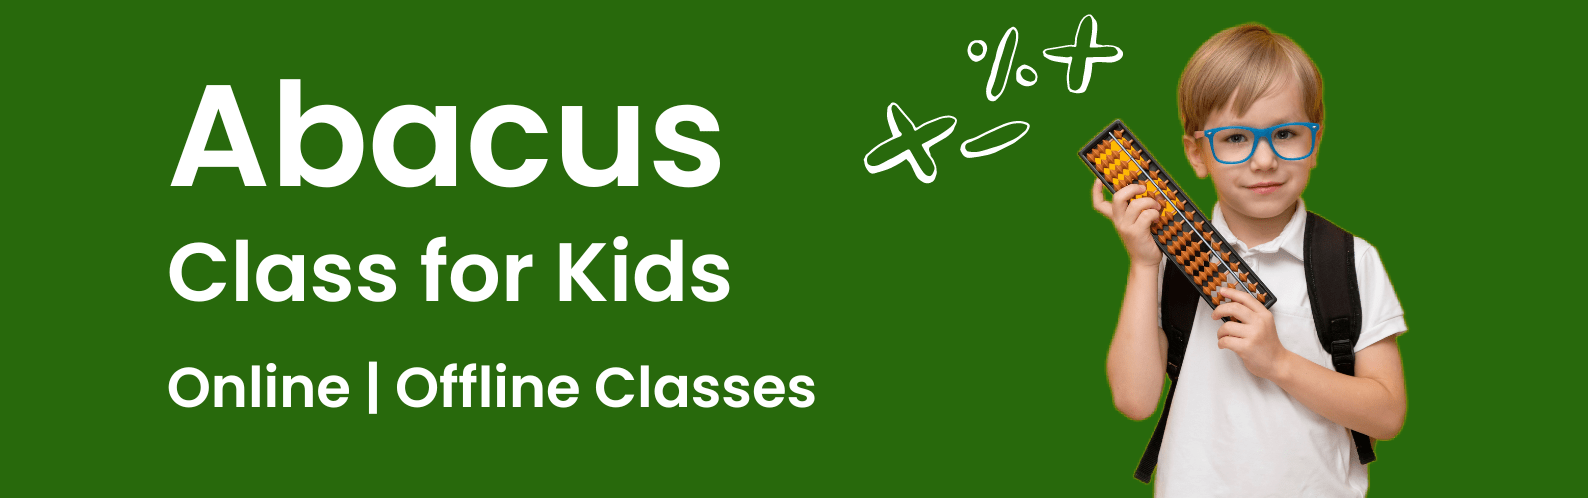 abacus class for kids